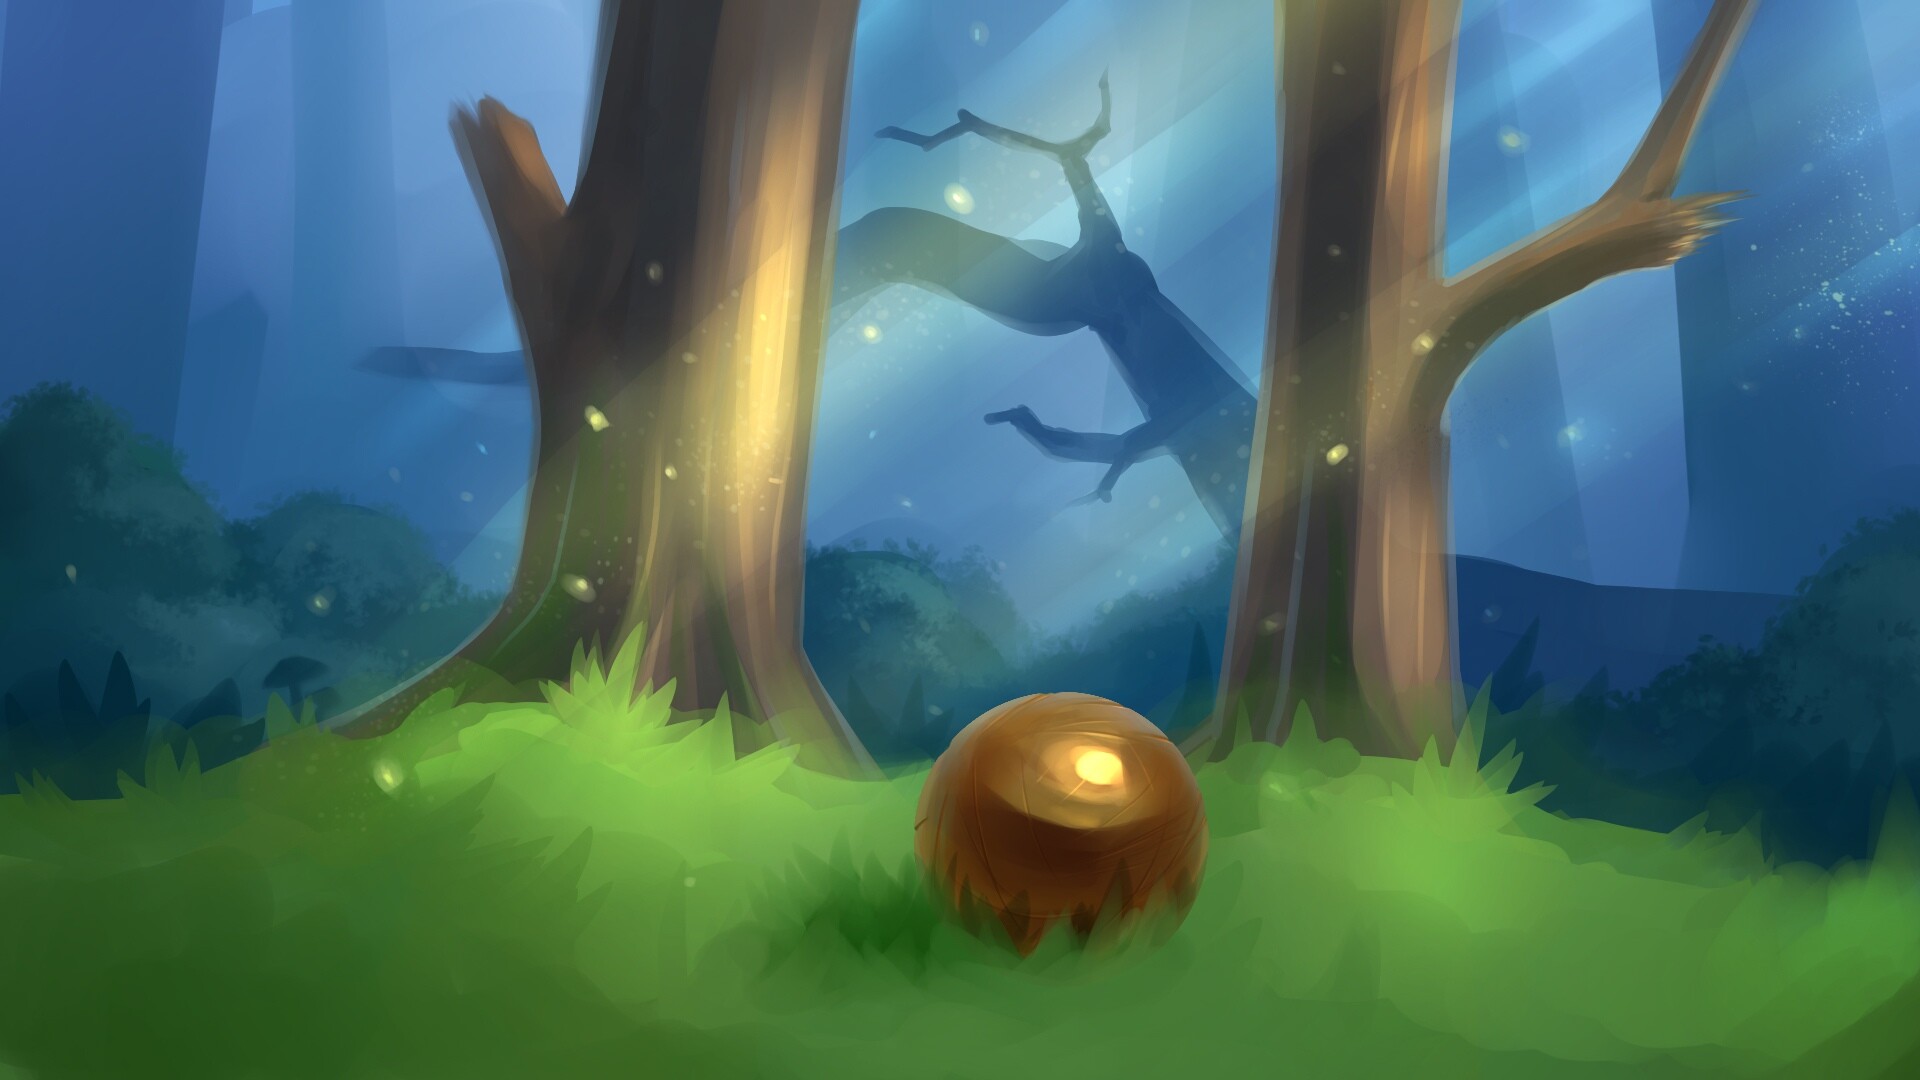 Copper ball in the magic forest.